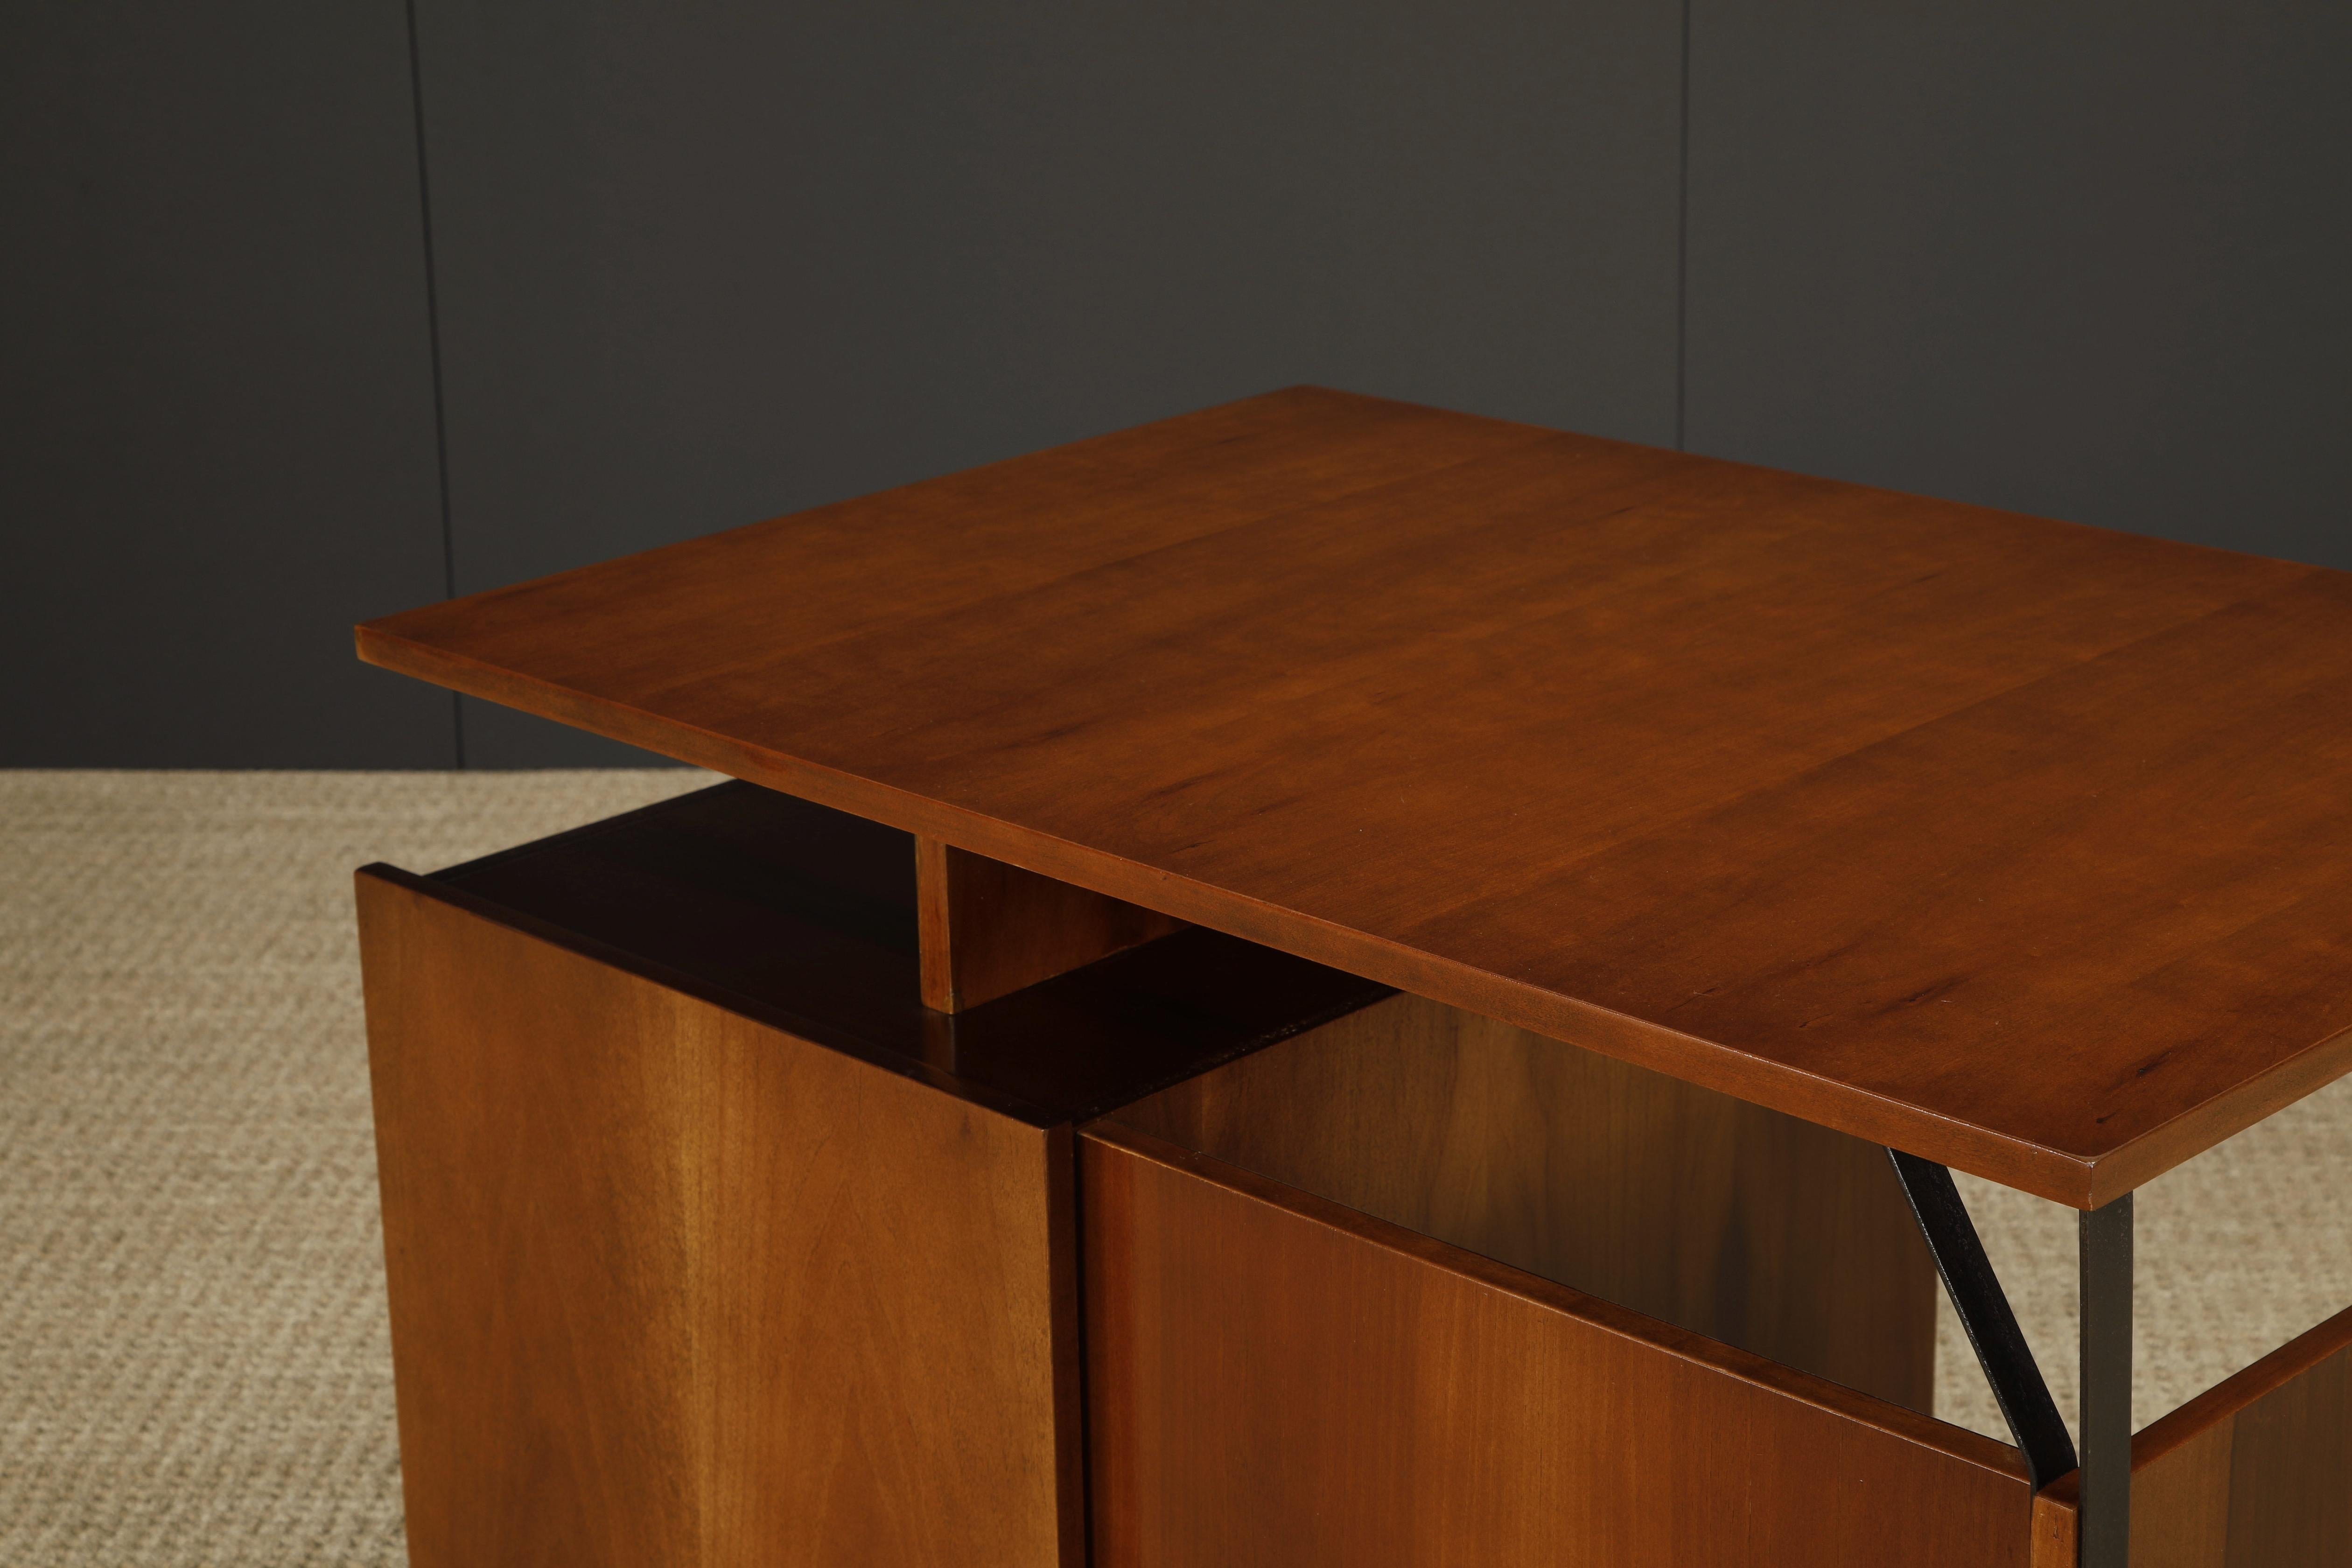 Italian Mid-Century Modern Desk, Style of Gio Ponti, c 1950s, Refinished For Sale 6